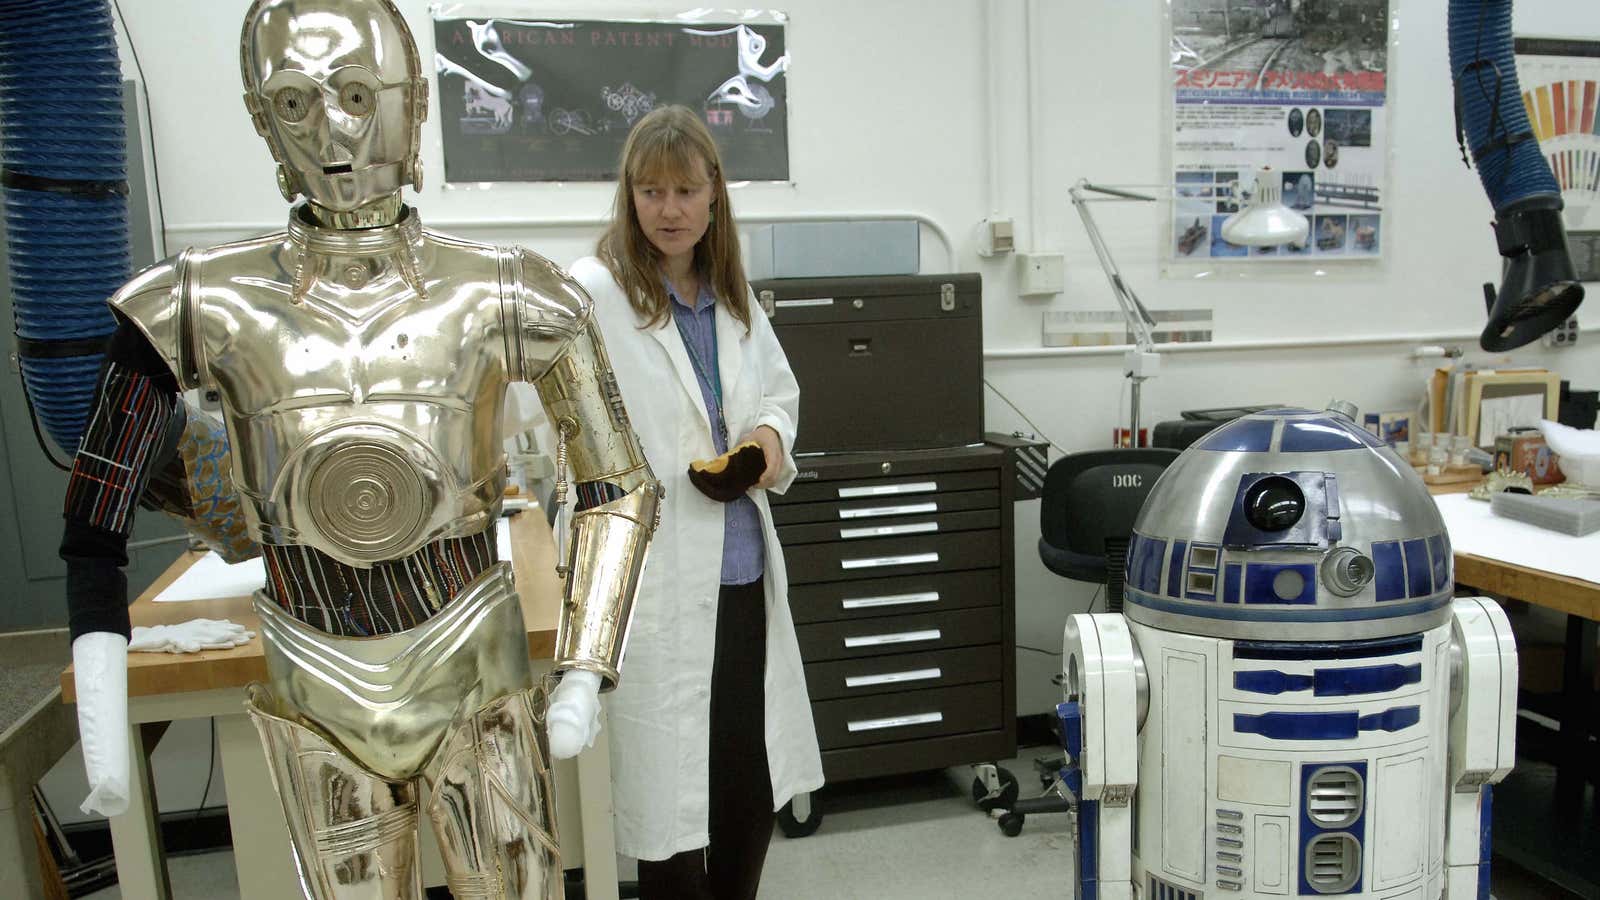 We need more women working on the R2D2s of the future.